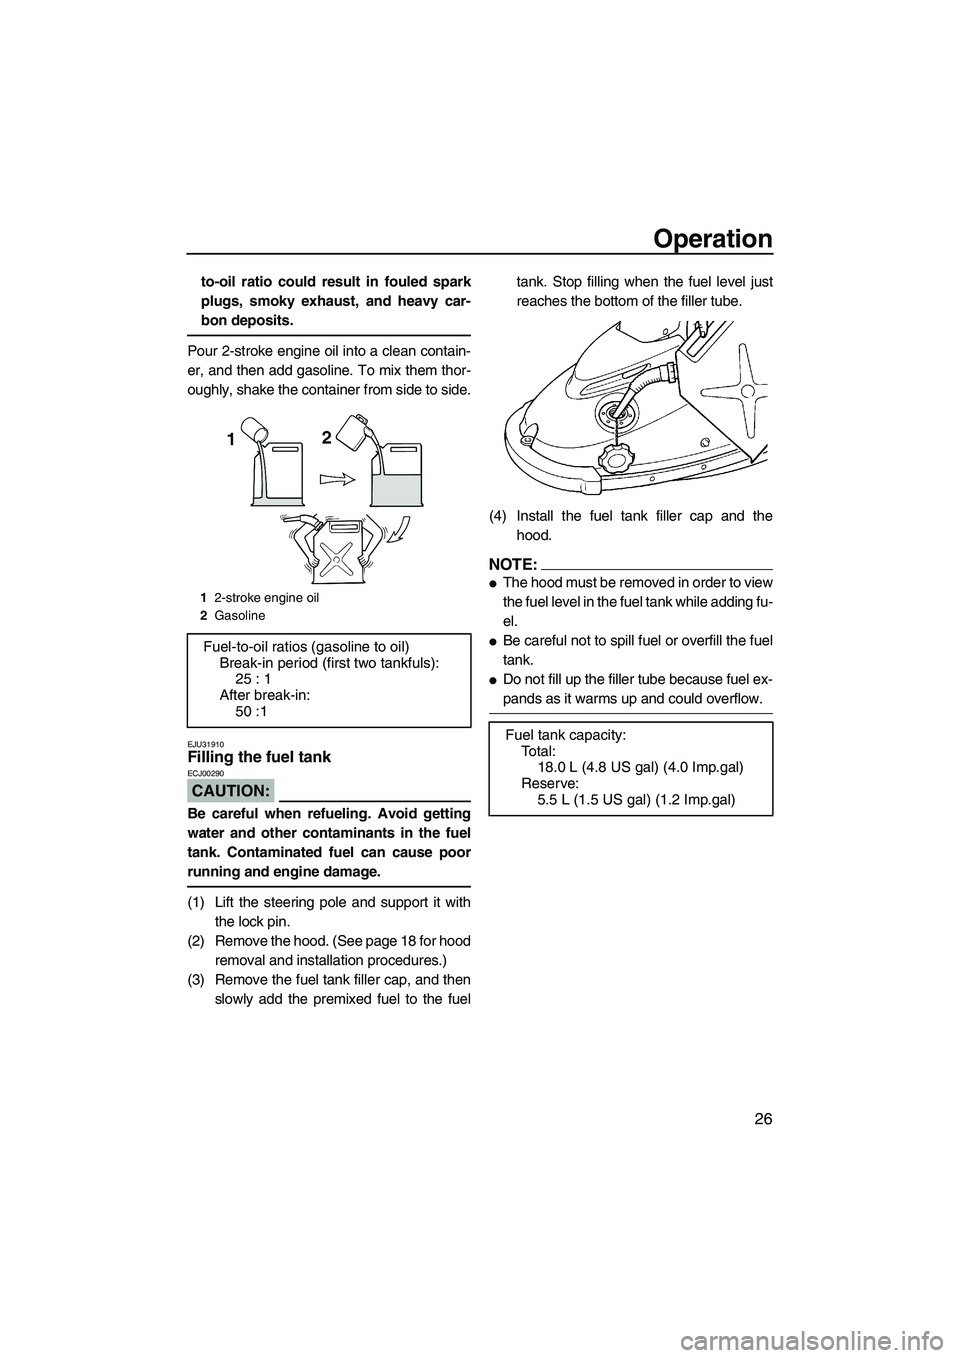 YAMAHA SUPERJET 2007 Owners Guide Operation
26
to-oil ratio could result in fouled spark
plugs, smoky exhaust, and heavy car-
bon deposits.
Pour 2-stroke engine oil into a clean contain-
er, and then add gasoline. To mix them thor-
ou